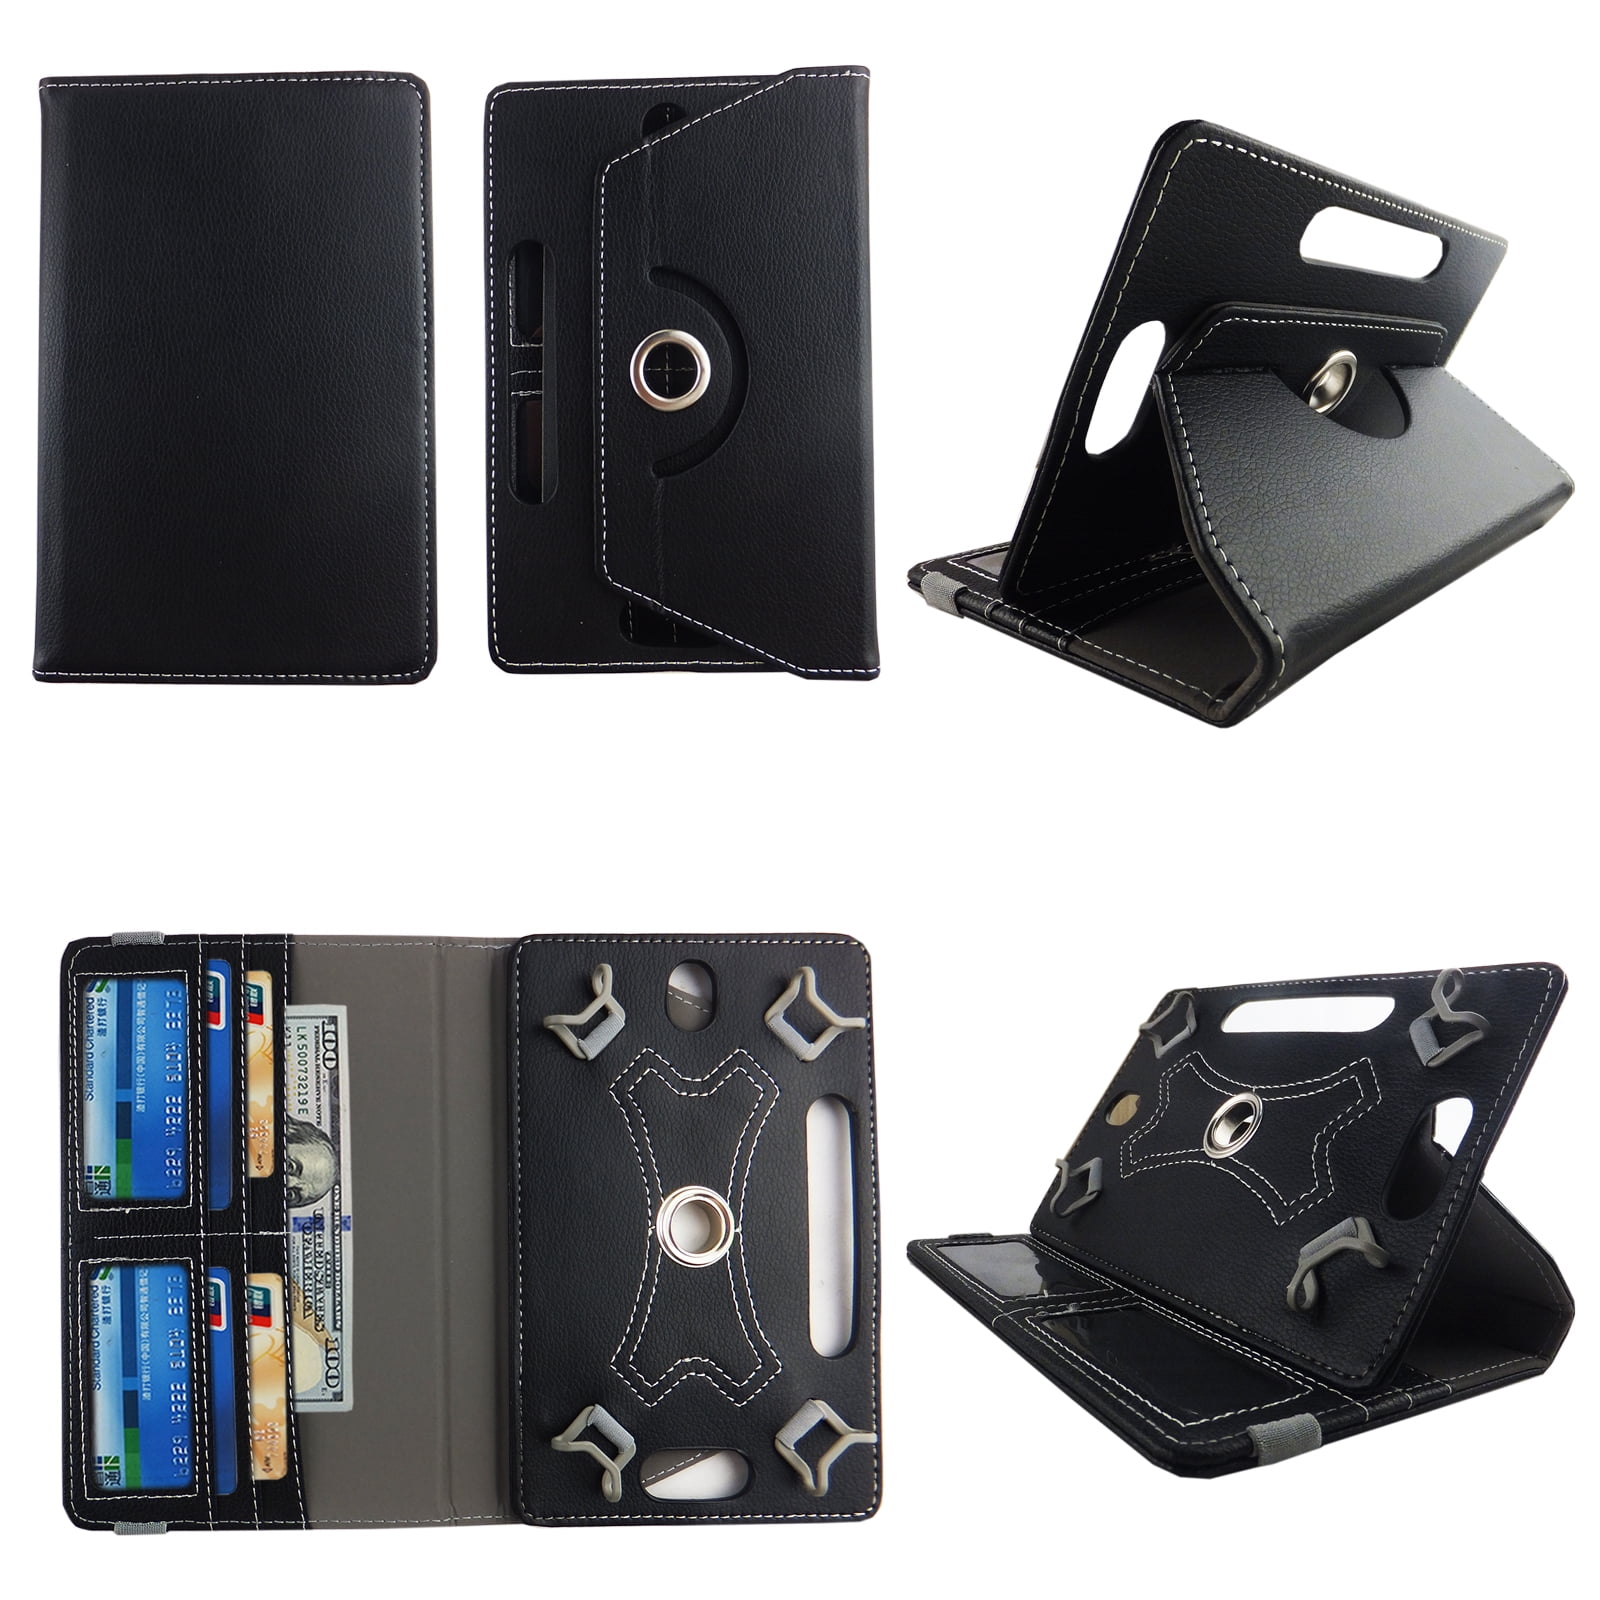 for Universal 8 7 7.9 9 Inch Android Tablet Case 360 Degree Rotating PU  Leather Stand Folio Cover for Fire HD 8/Galaxy Tab A/Tab E/Tab 4/Tab S2 8.0